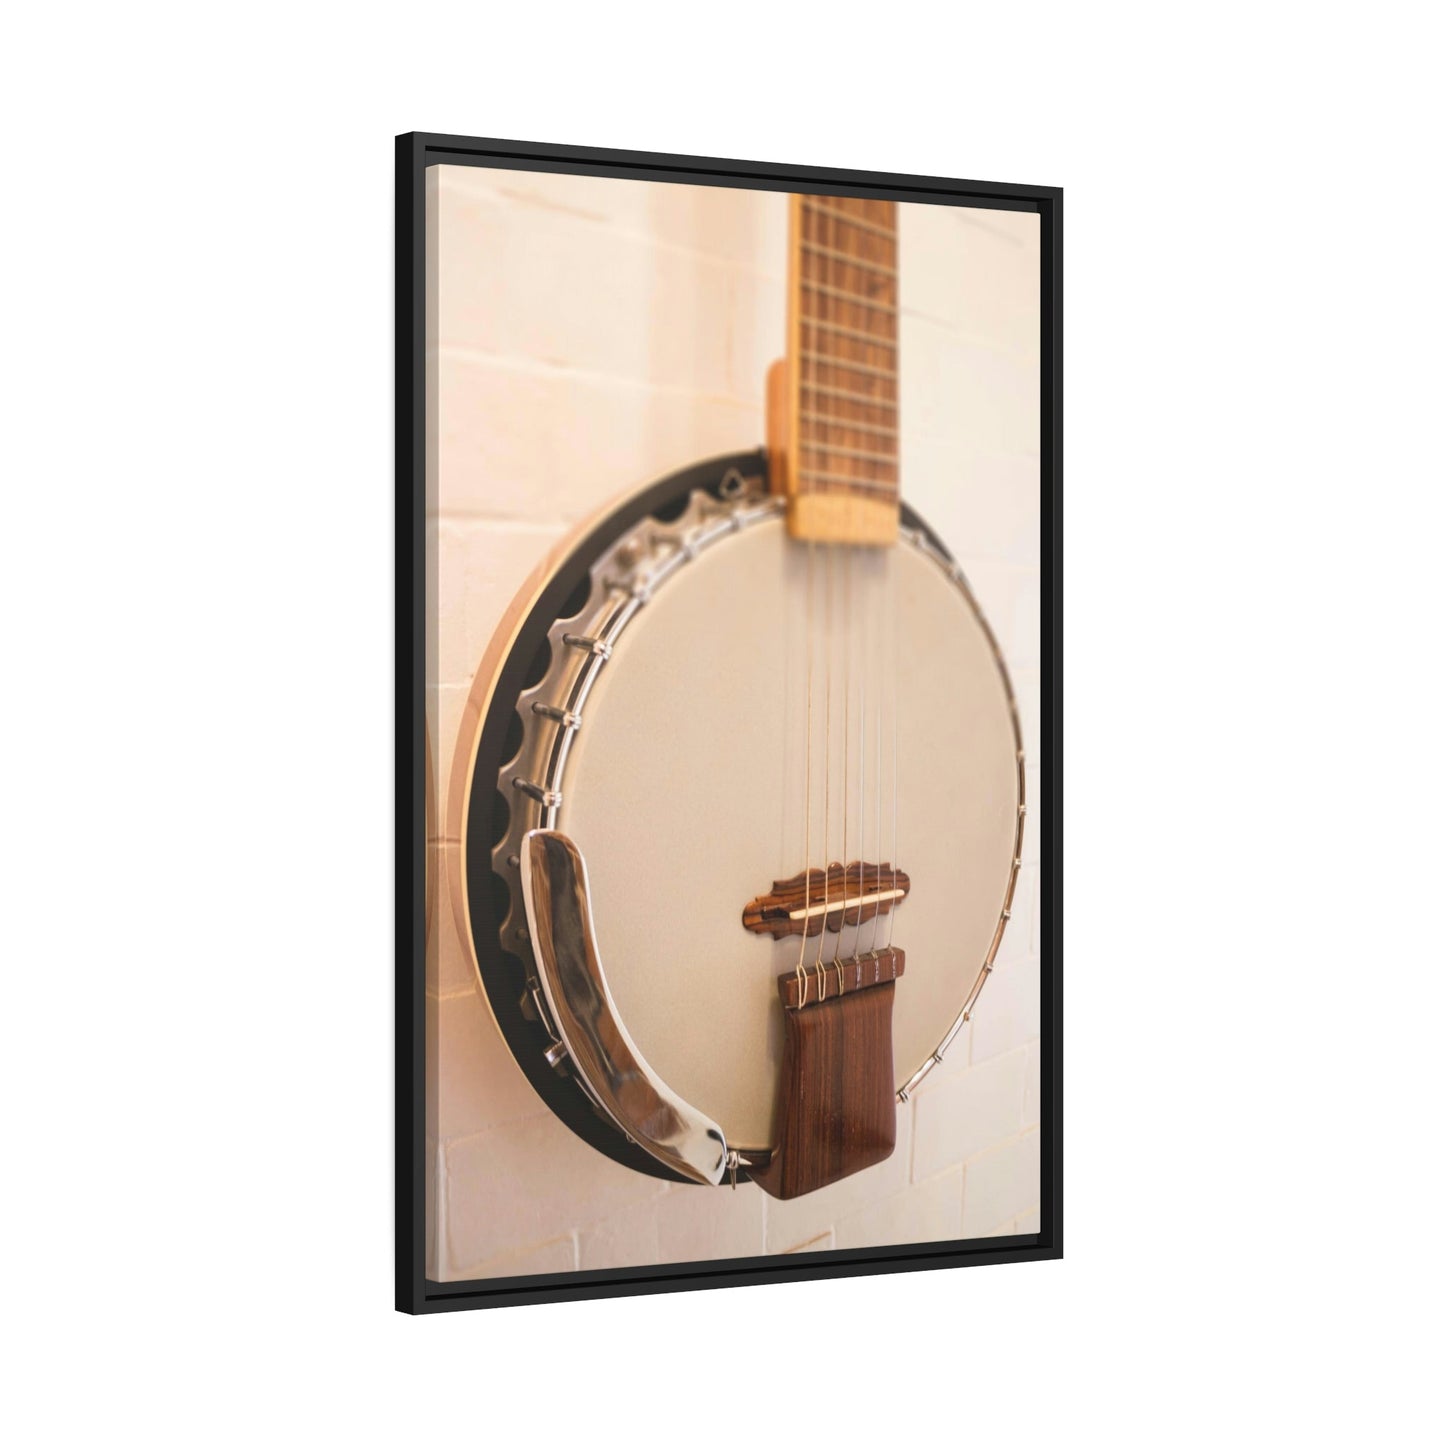 Melodic Strings: Art Print on Canvas with a Close-Up of a Banjo